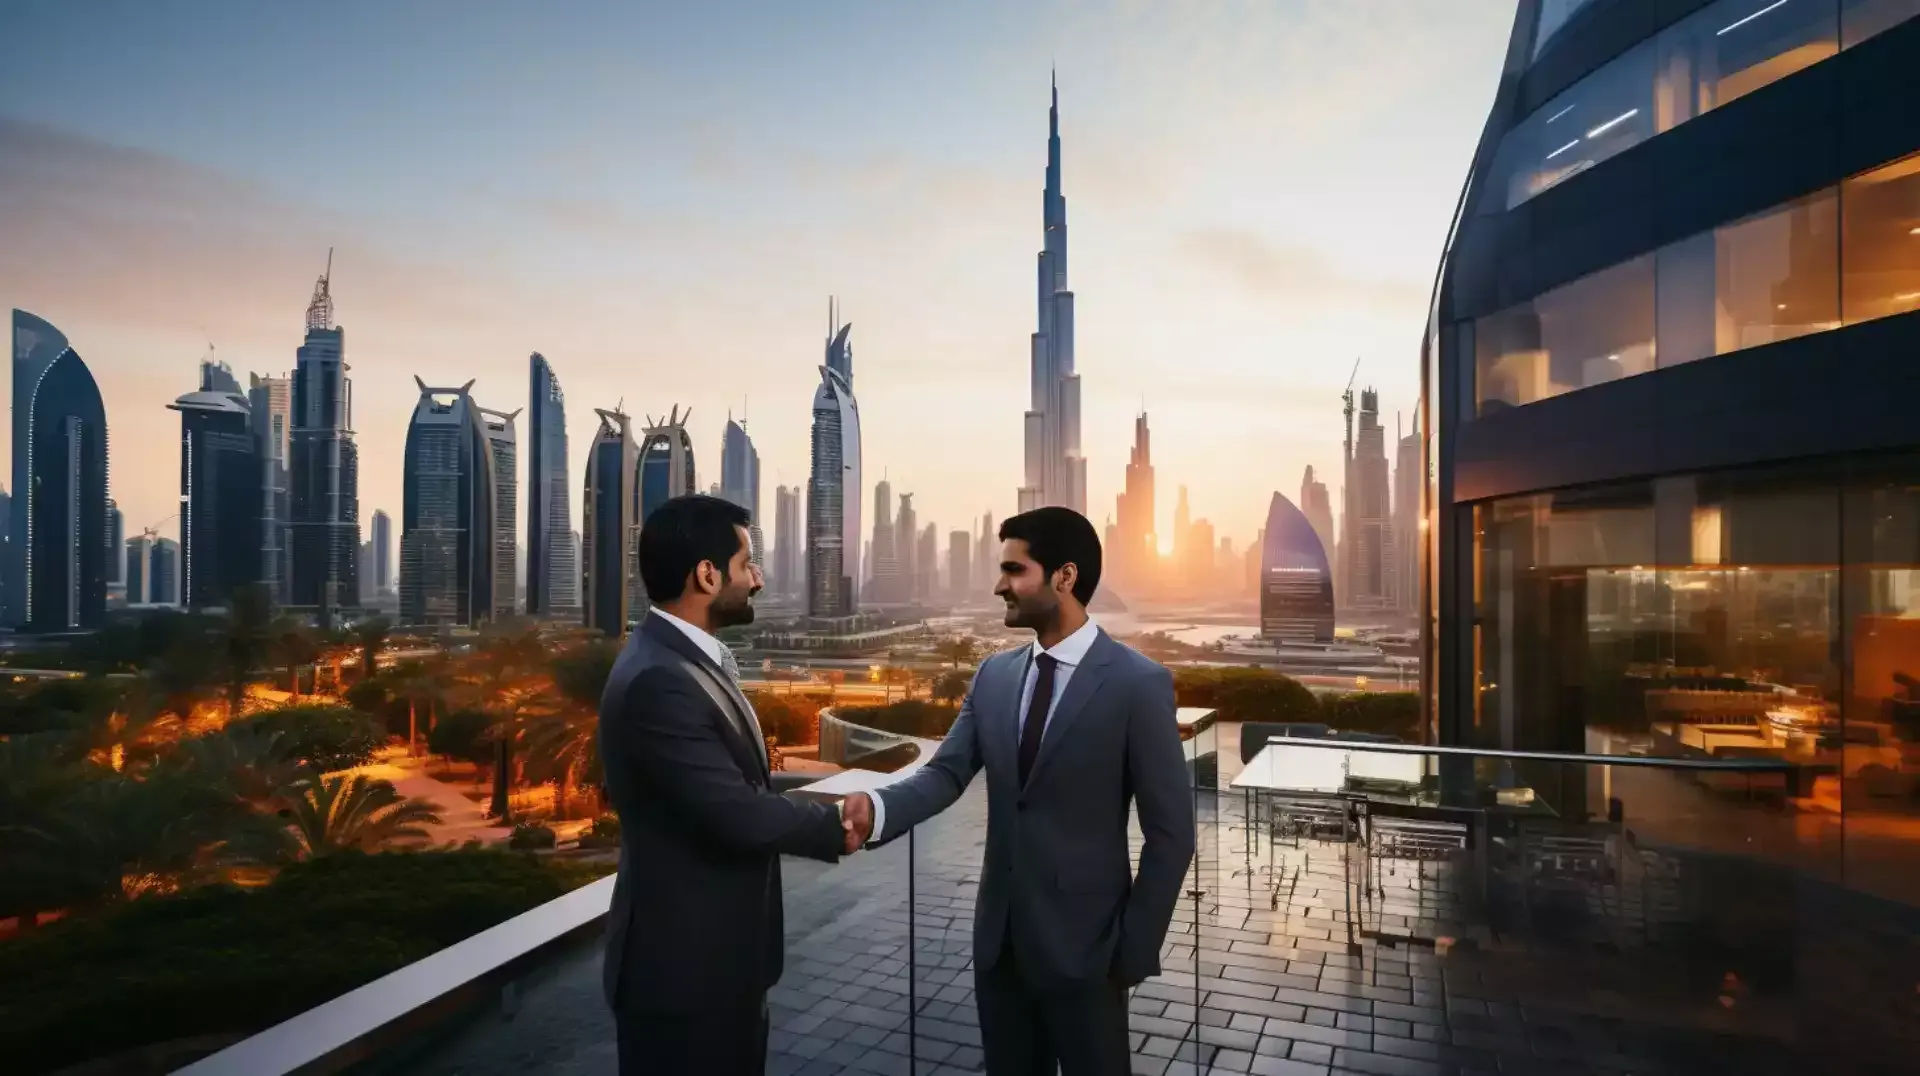 Building Your Dream: Starting a Business in Dubai 